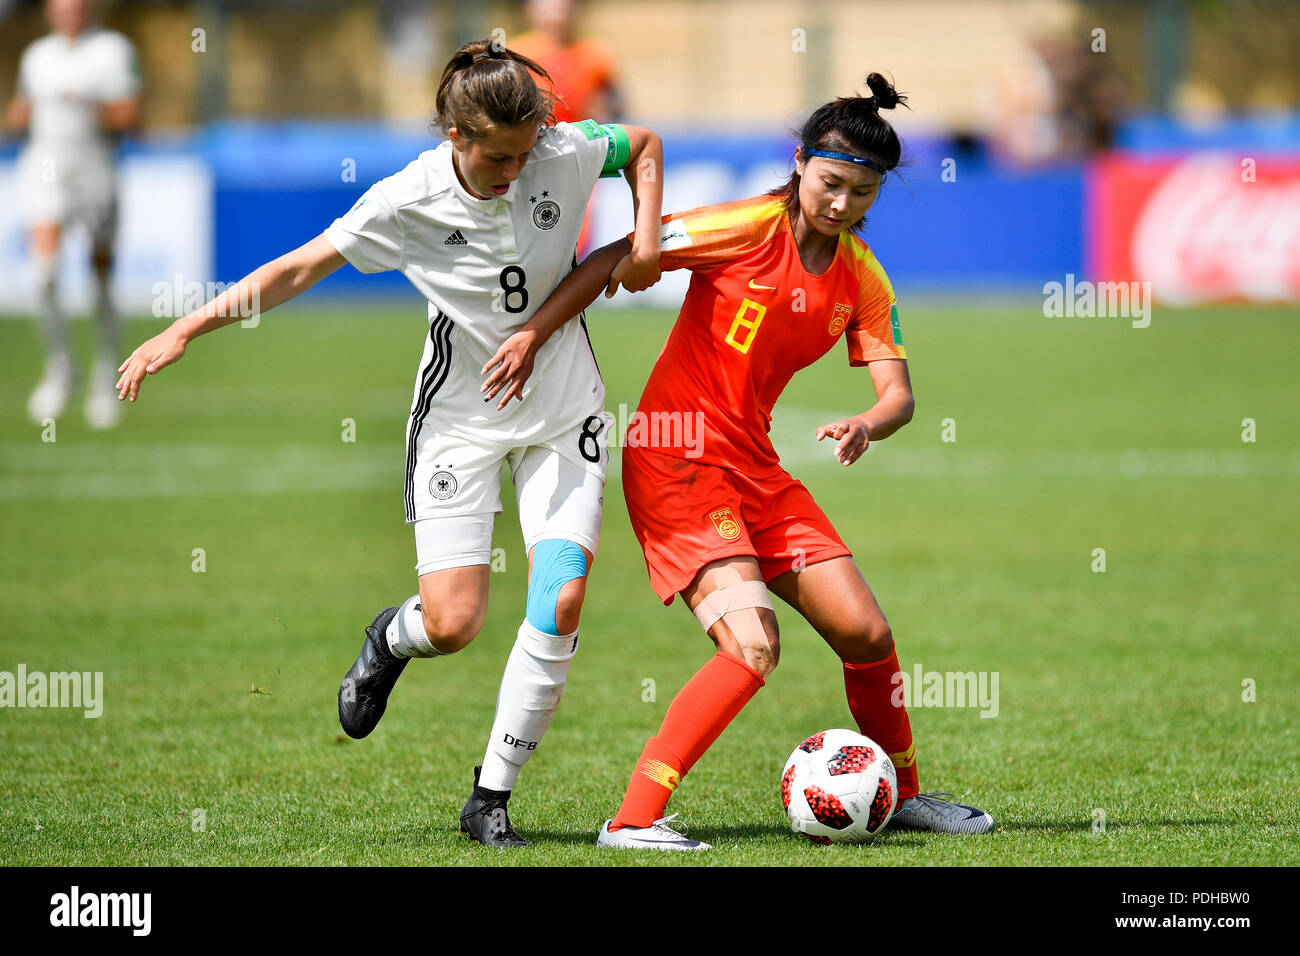 Saint Malo. 9th Aug, 2018. Shen Mengyu (R) of China vies with Jana Feldkamp of Germany during a Group D match at the FIFA U-20 Women's World Cup France 2018 in Saint-Malo, France on Aug. 9, 2018. Germany won 2-0. Credit: Chen Yichen/Xinhua/Alamy Live News Stock Photo